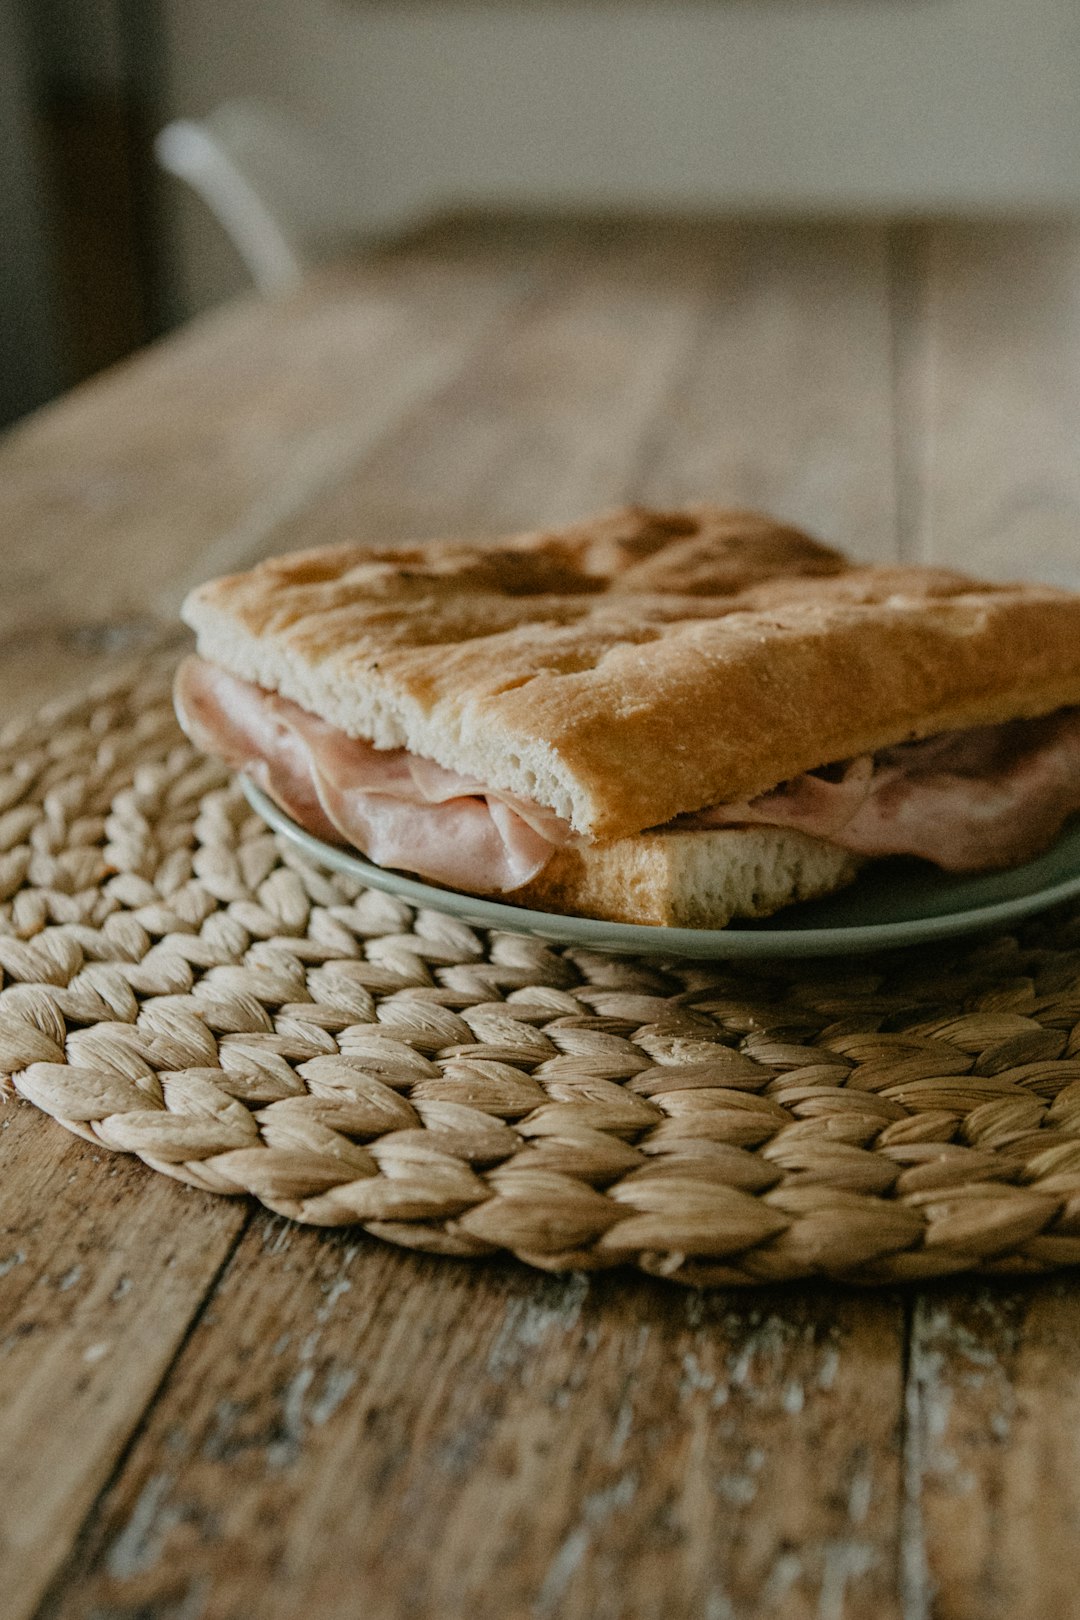 MORTADELLA: All About This Meat, Balogna's Italian Ancestor